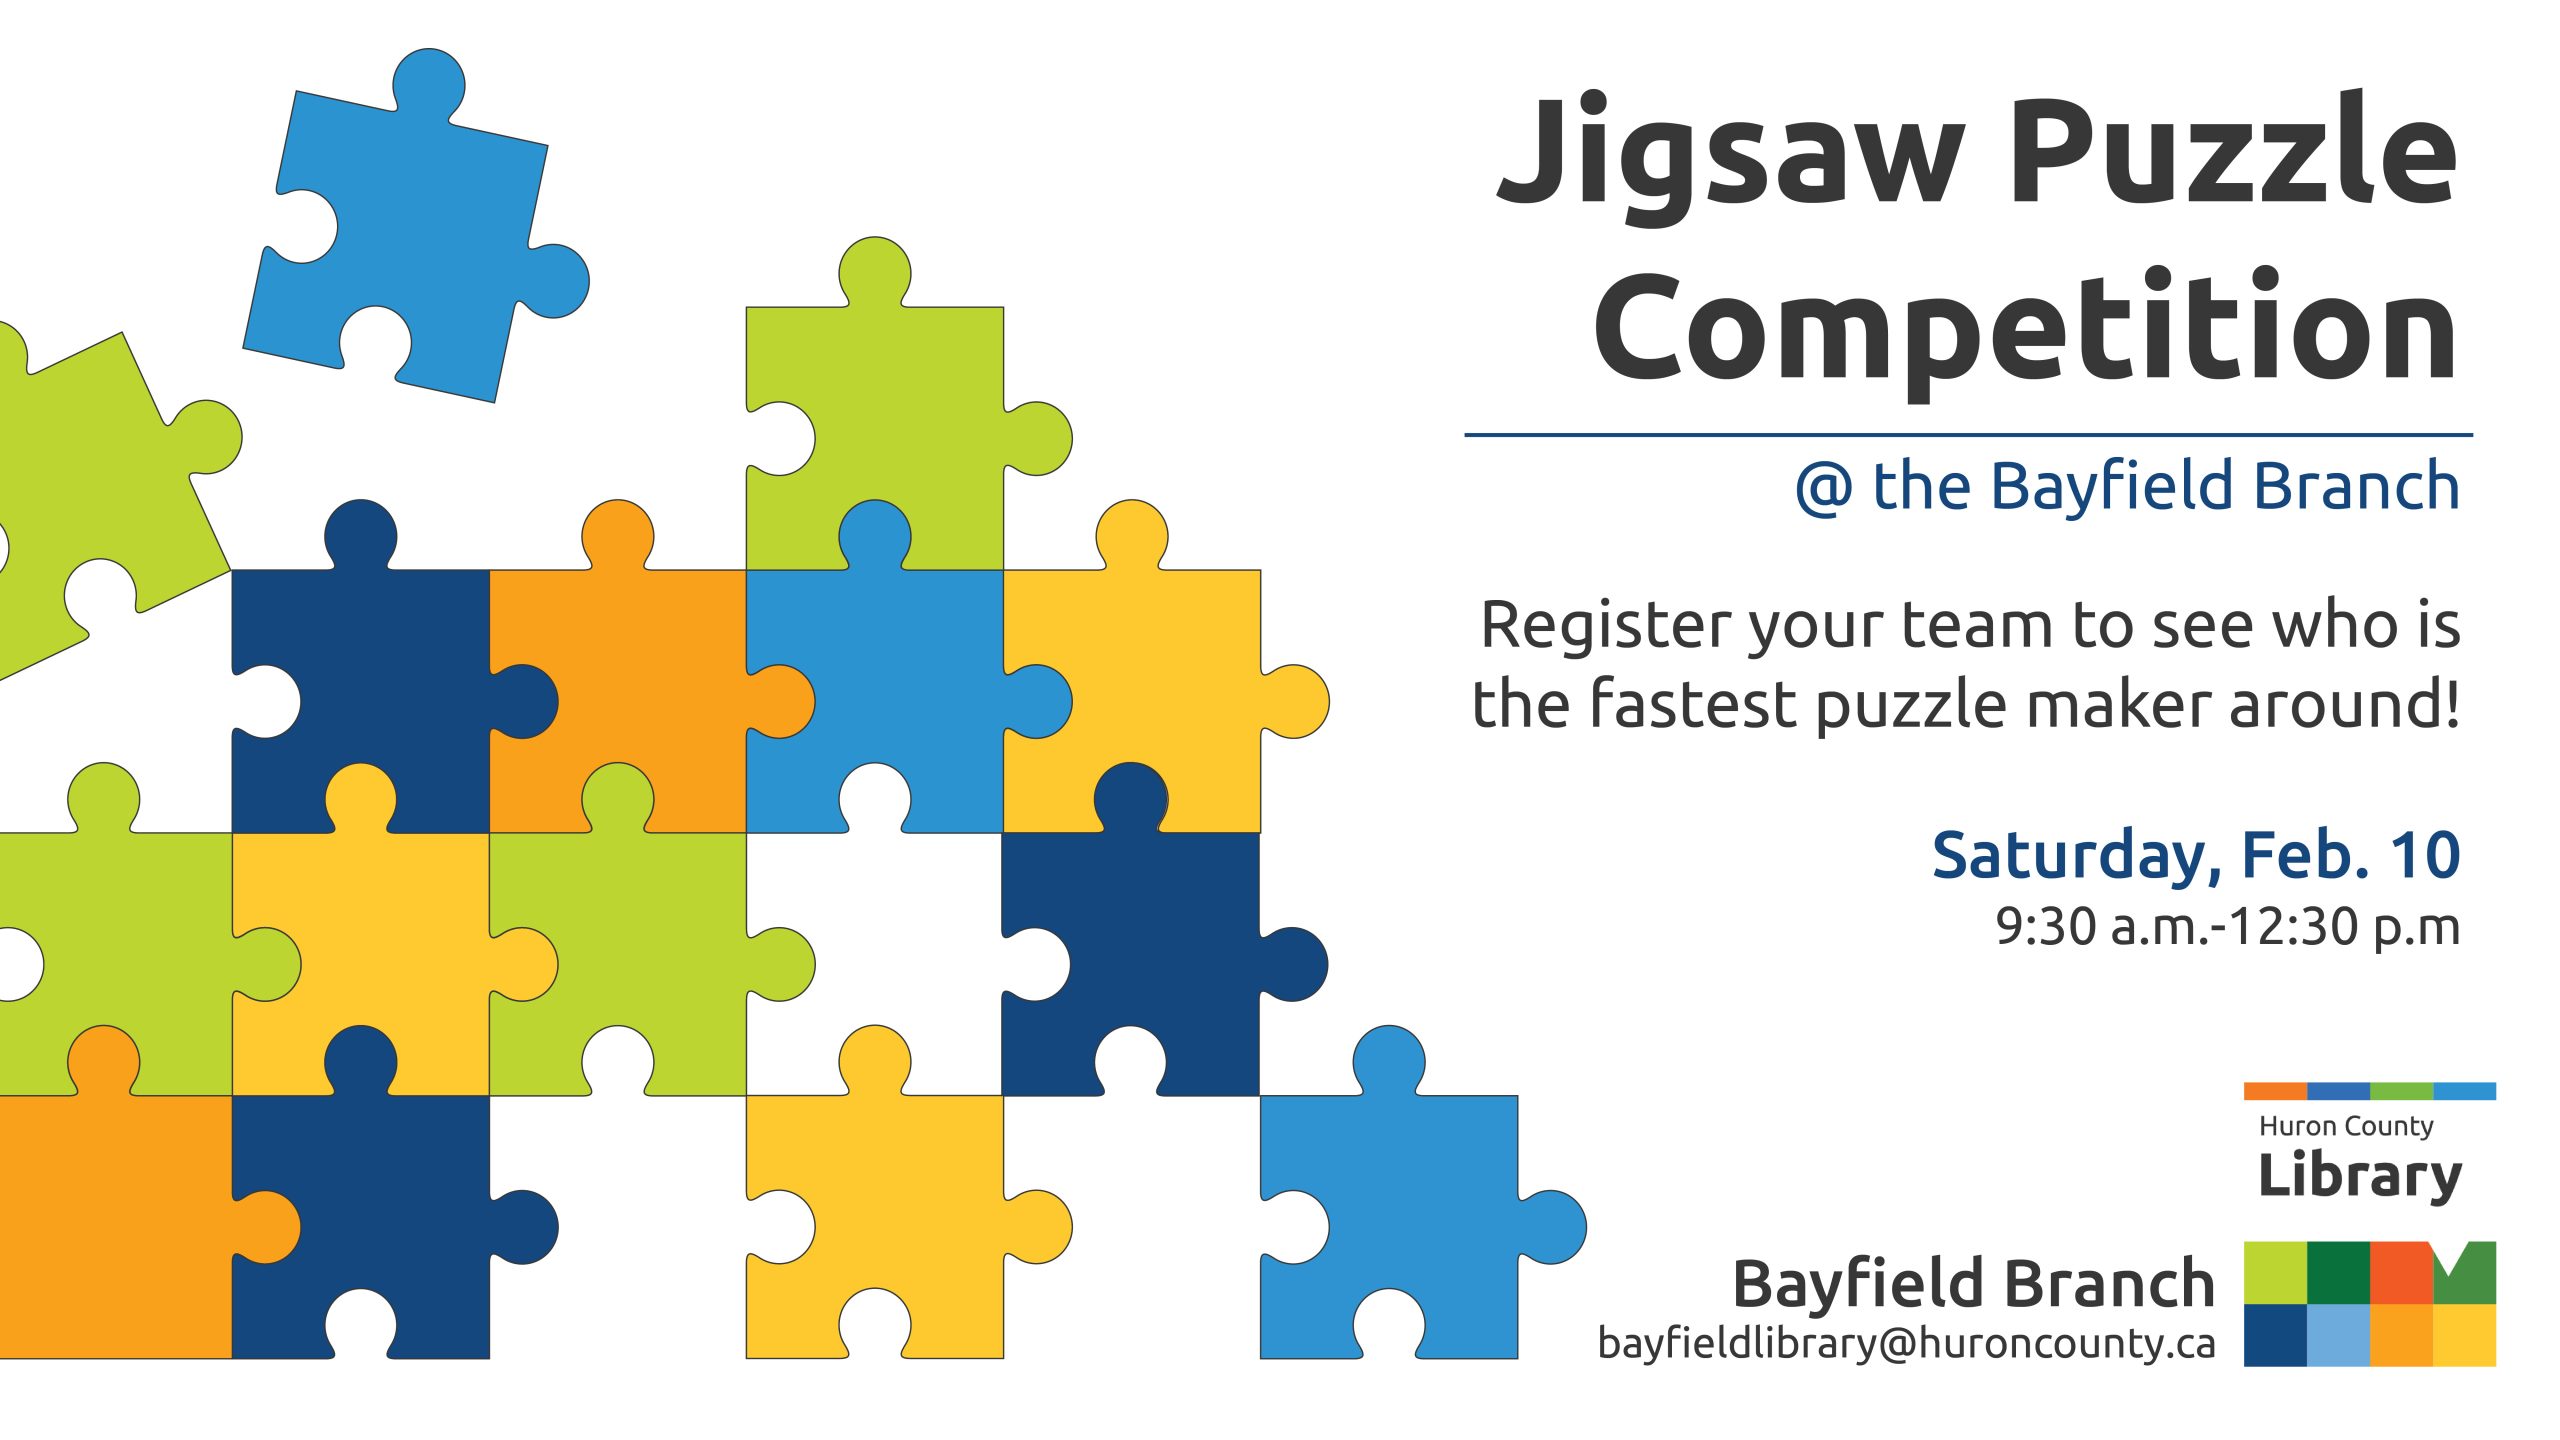 Illustration of puzzle pieces with text promoting puzzle competition at Bayfield branch